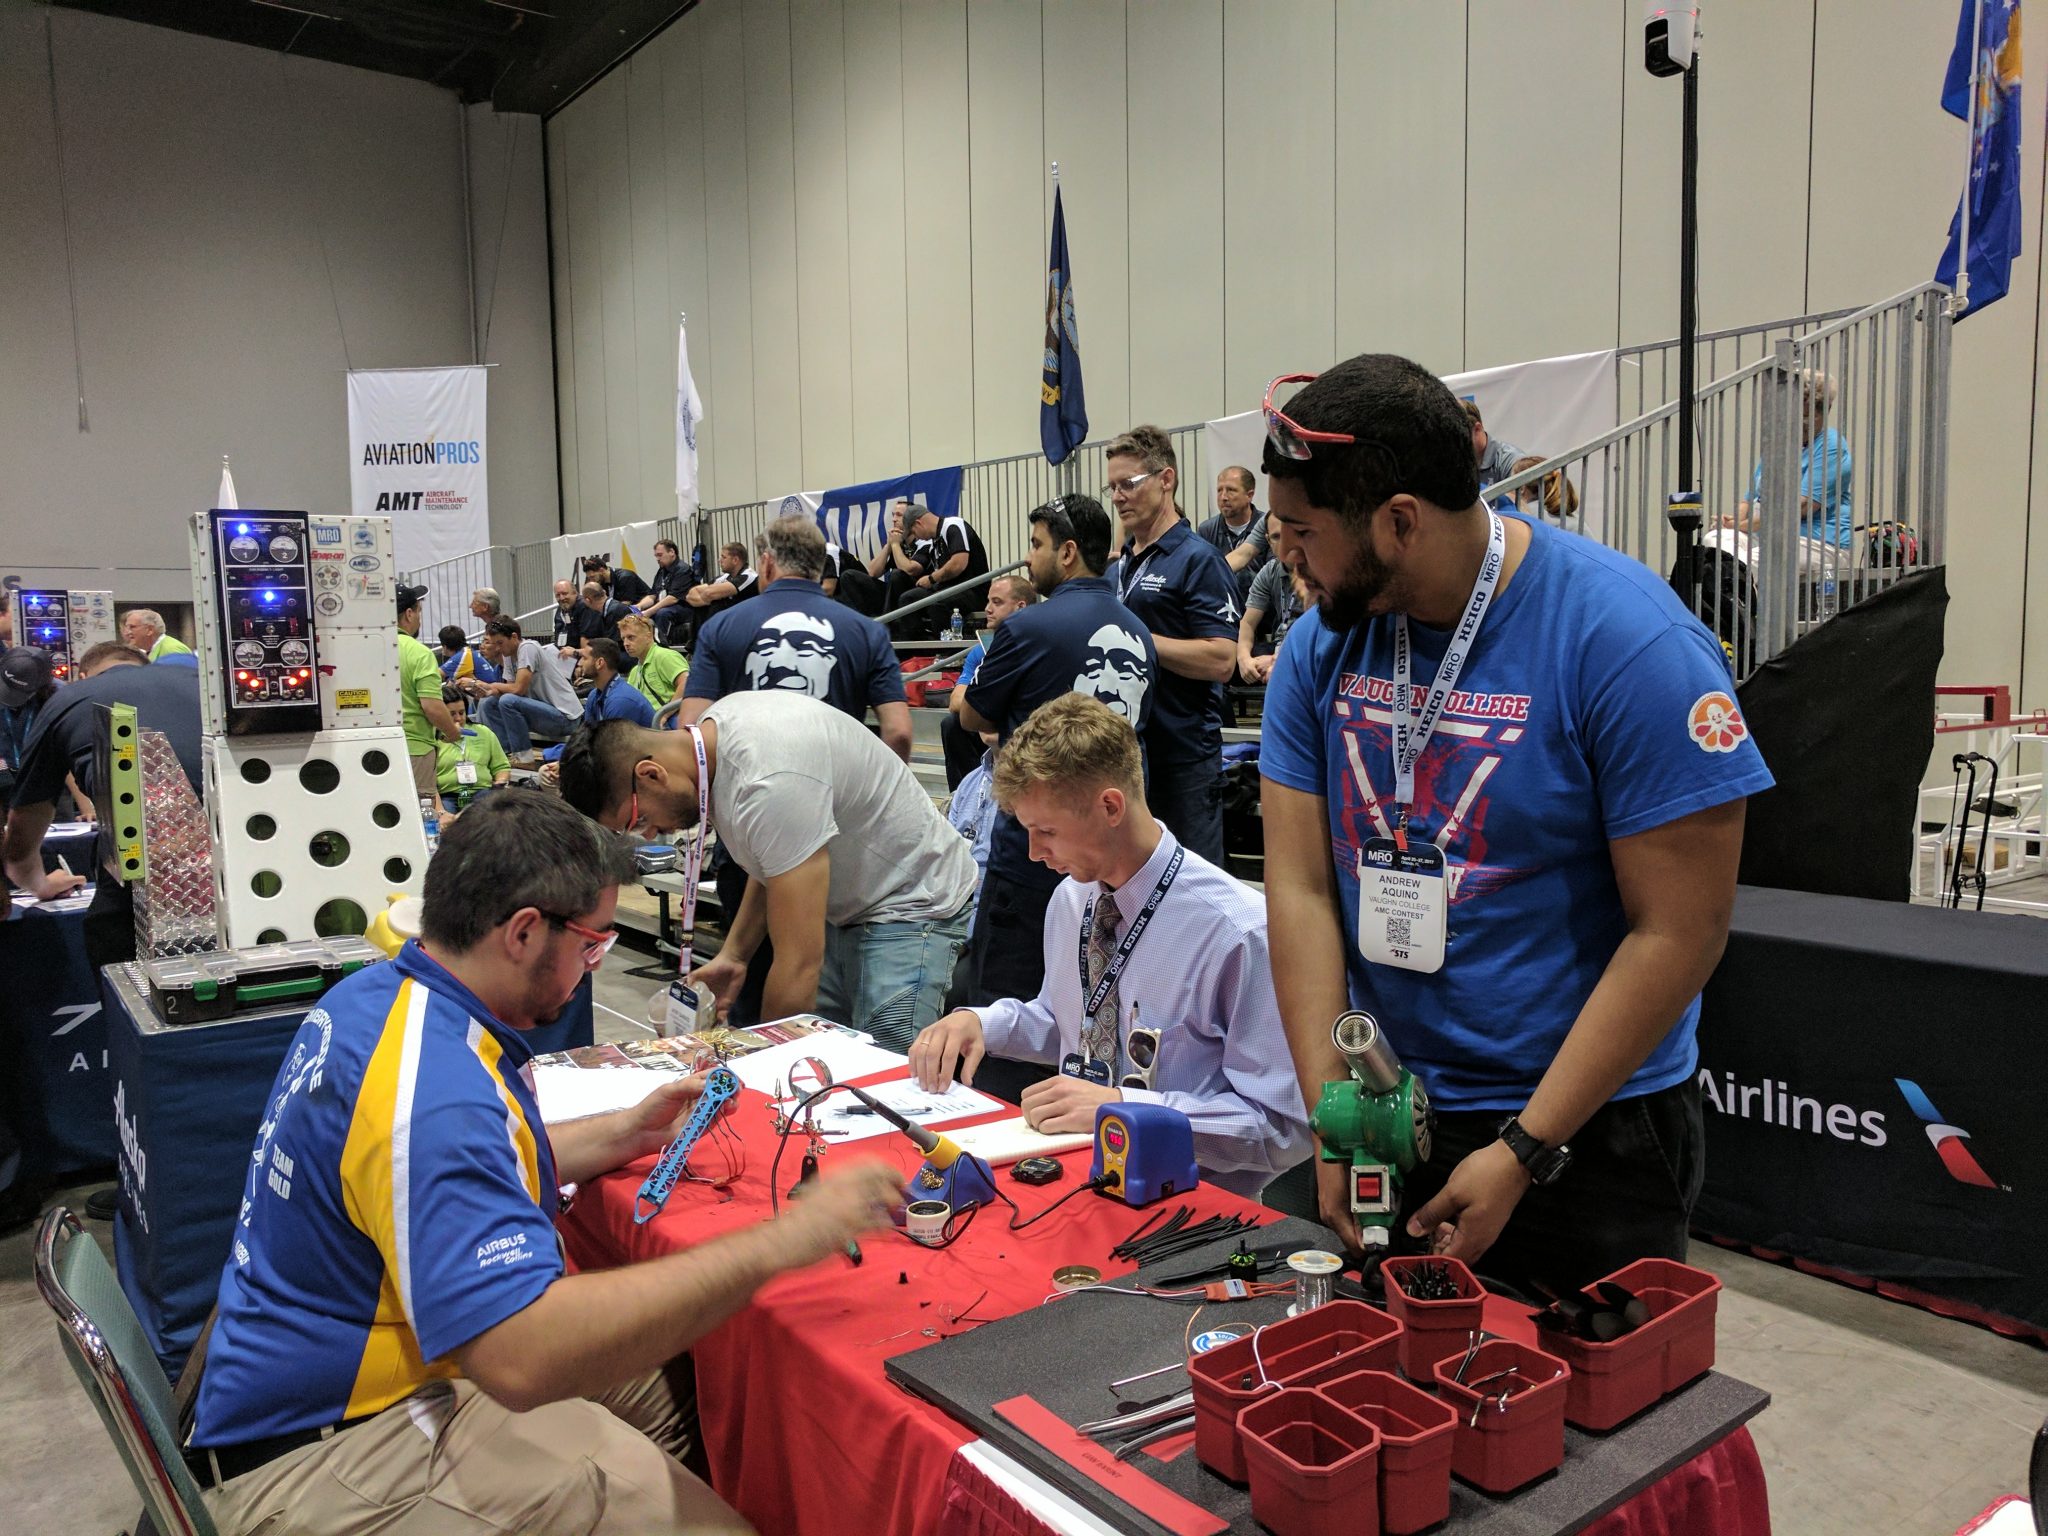 Aerospace Maintenance Competition Challenges ATI Students